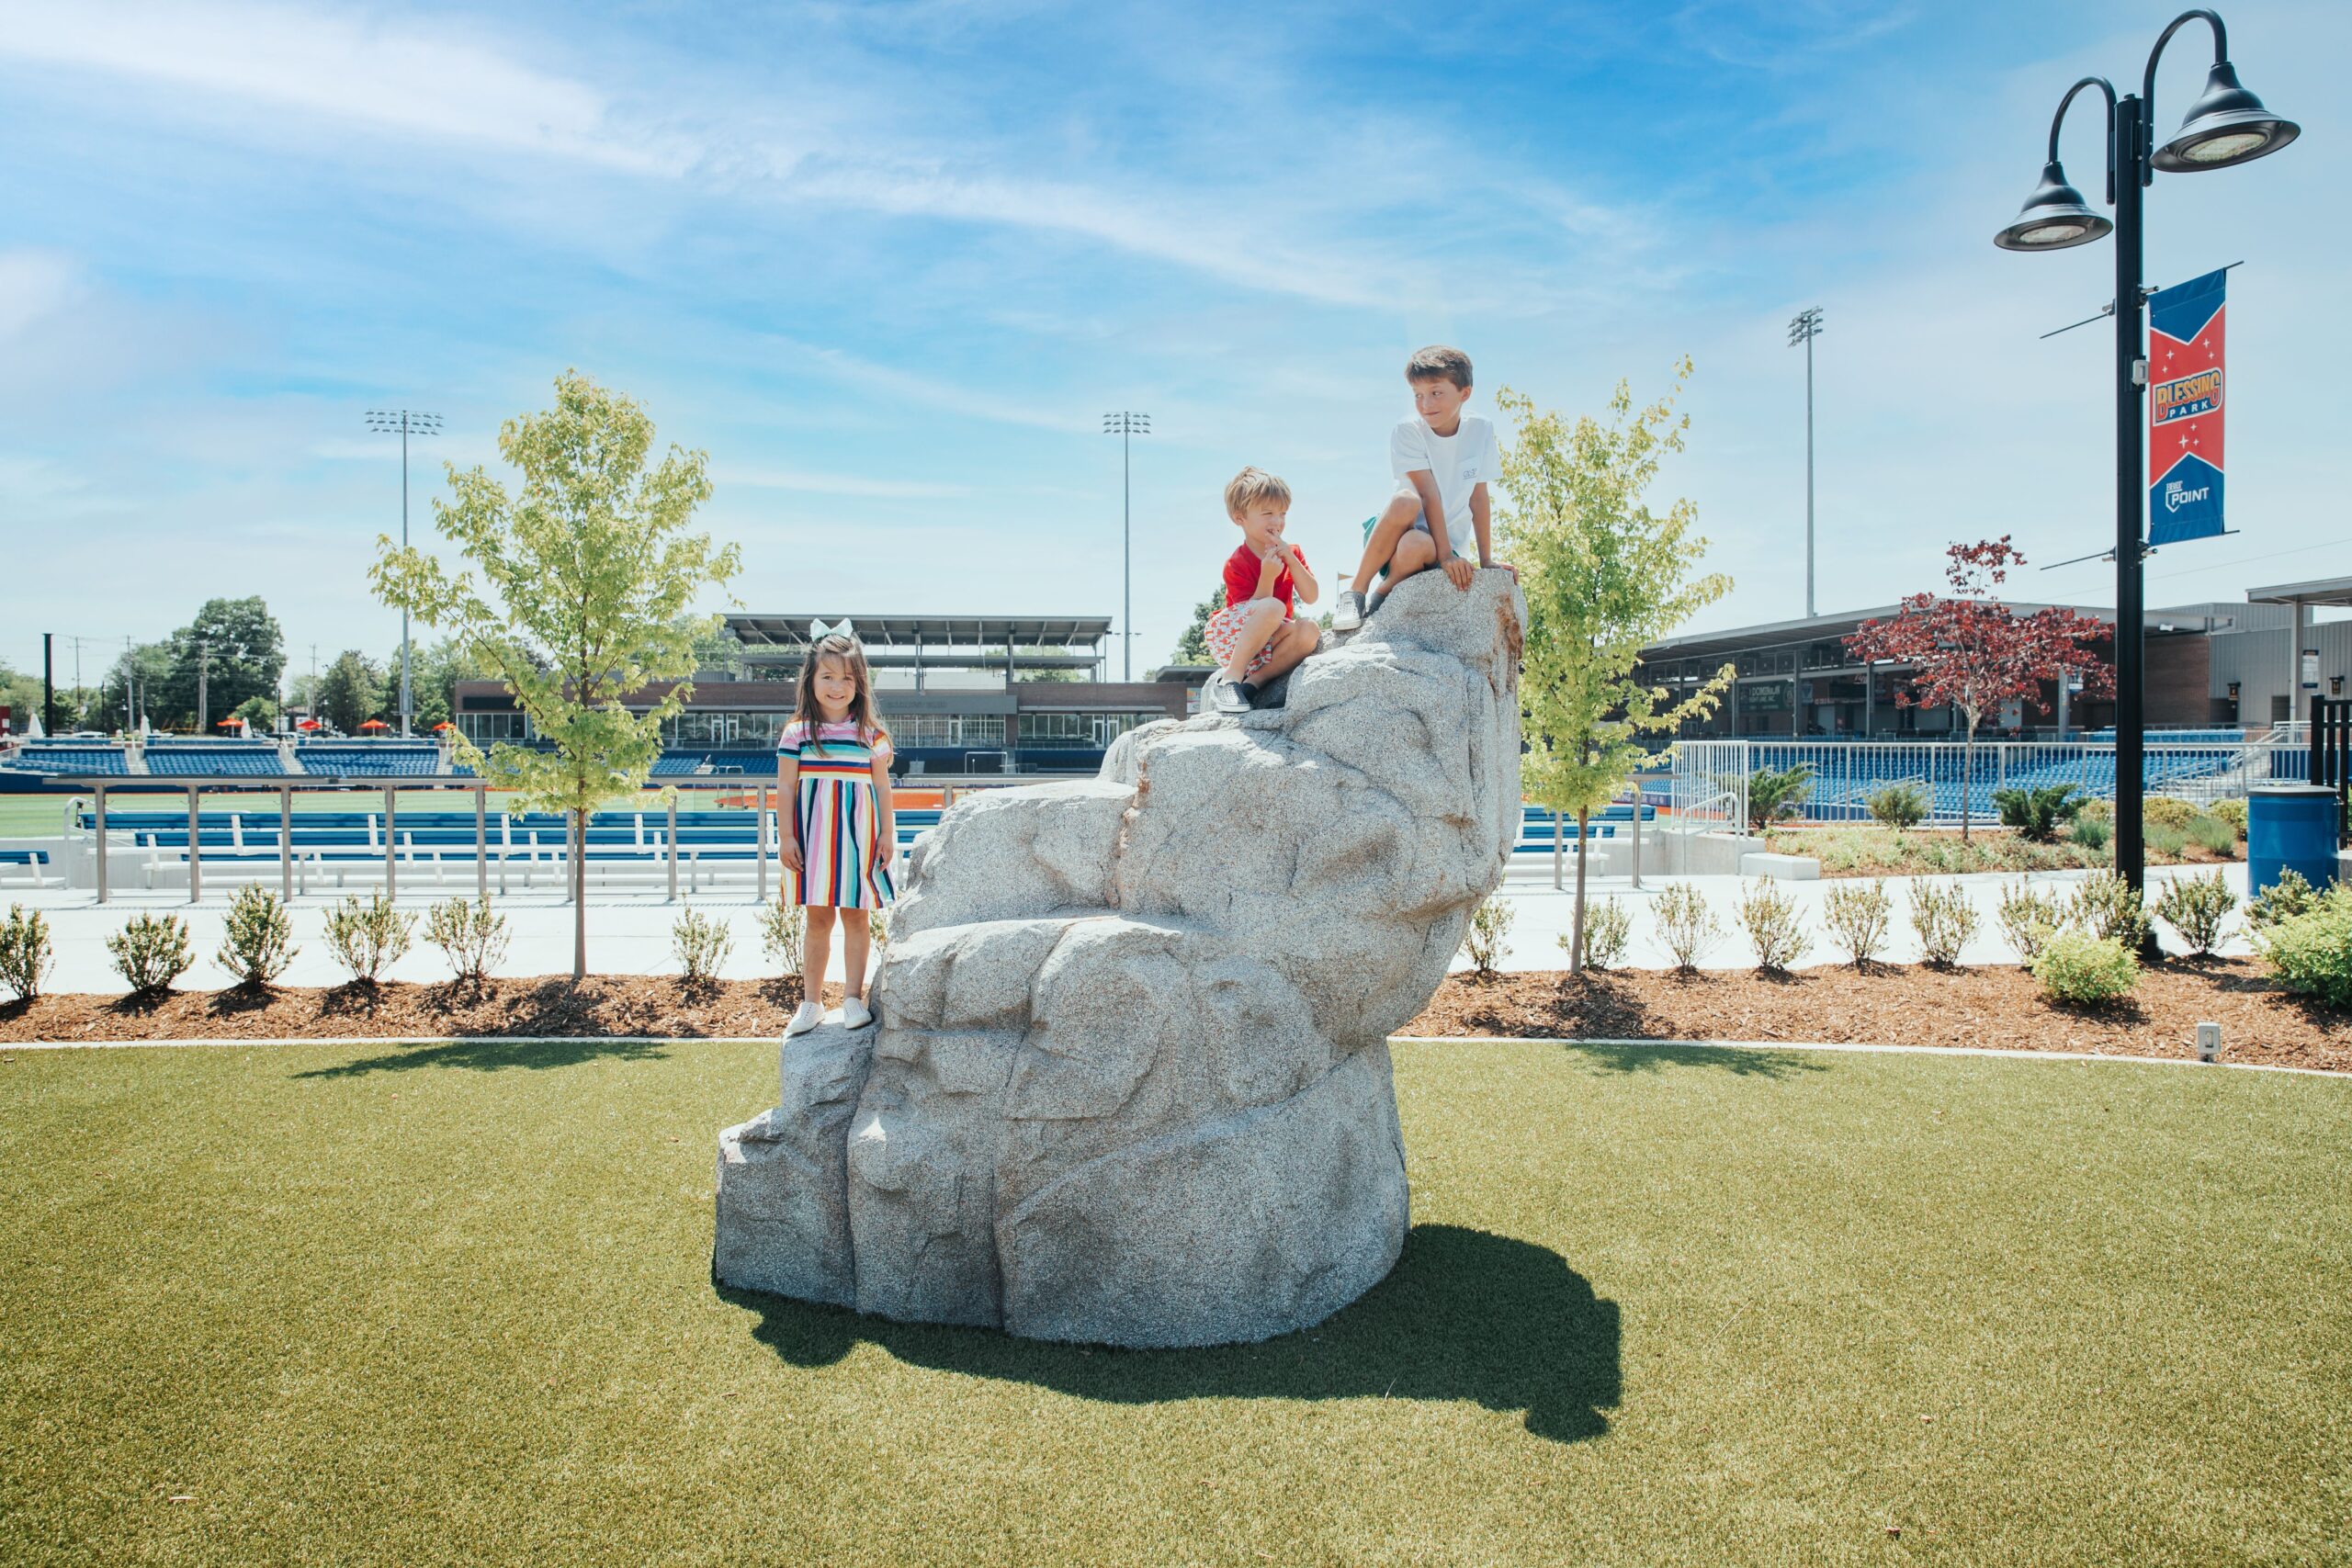 Kids climb on the boulder at Blessing Park inside the High Point Rockers stadium in High Point, NC.